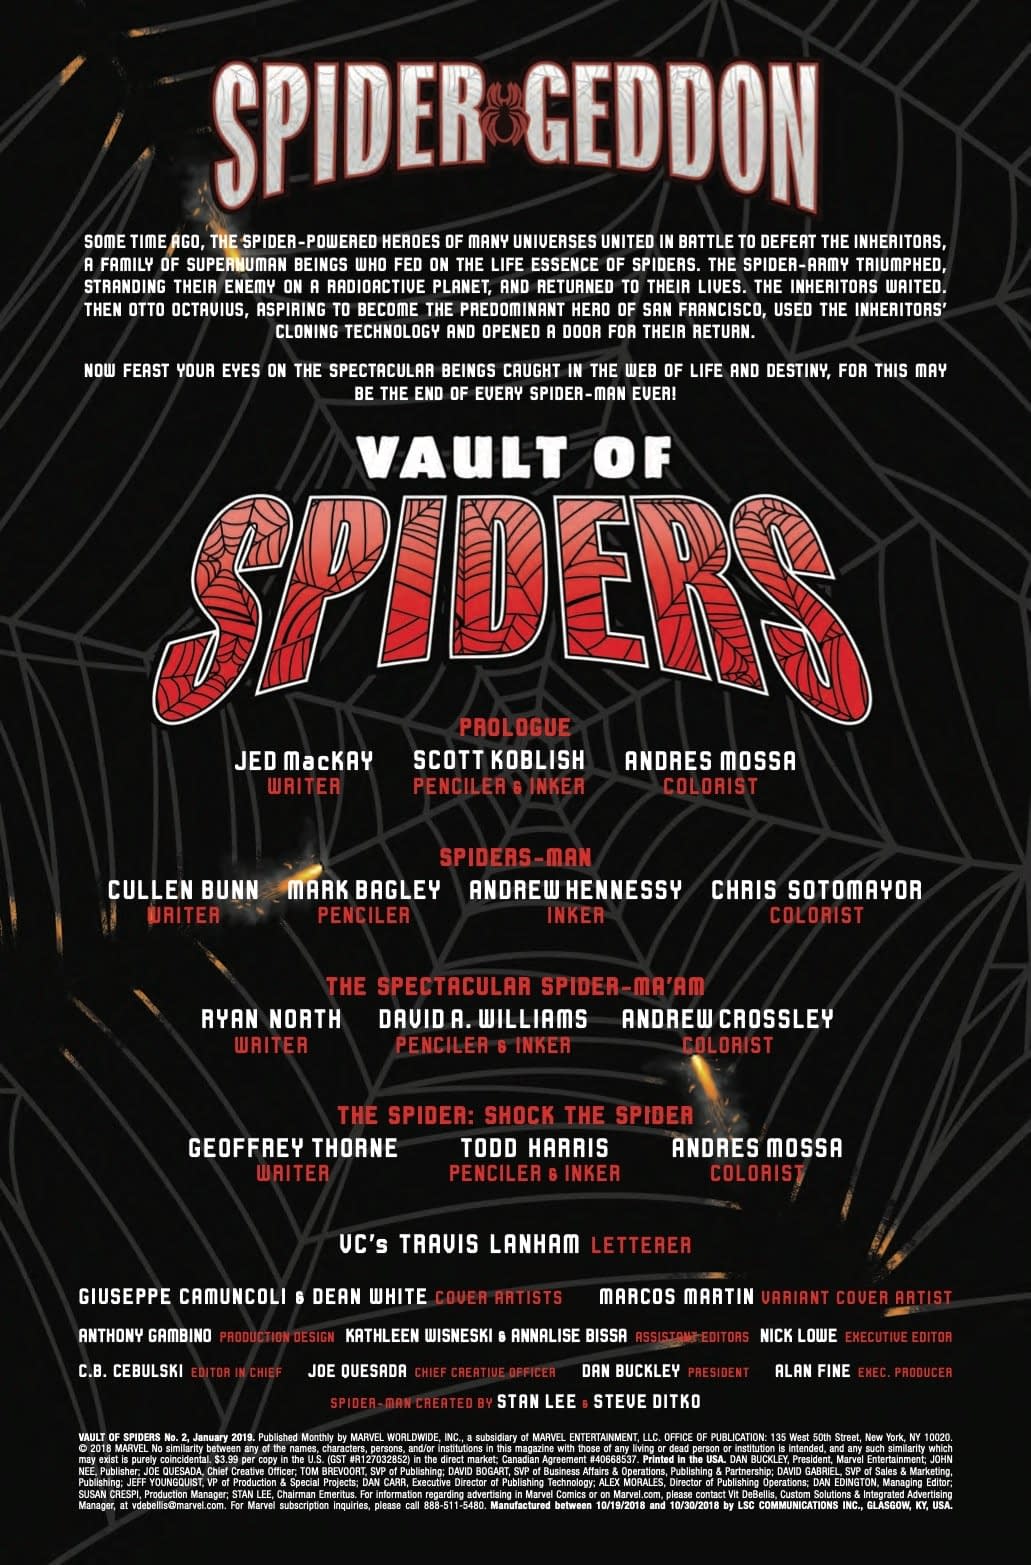 An Inferno for the Spider-Verse in Next Week's Vault of Spiders #2